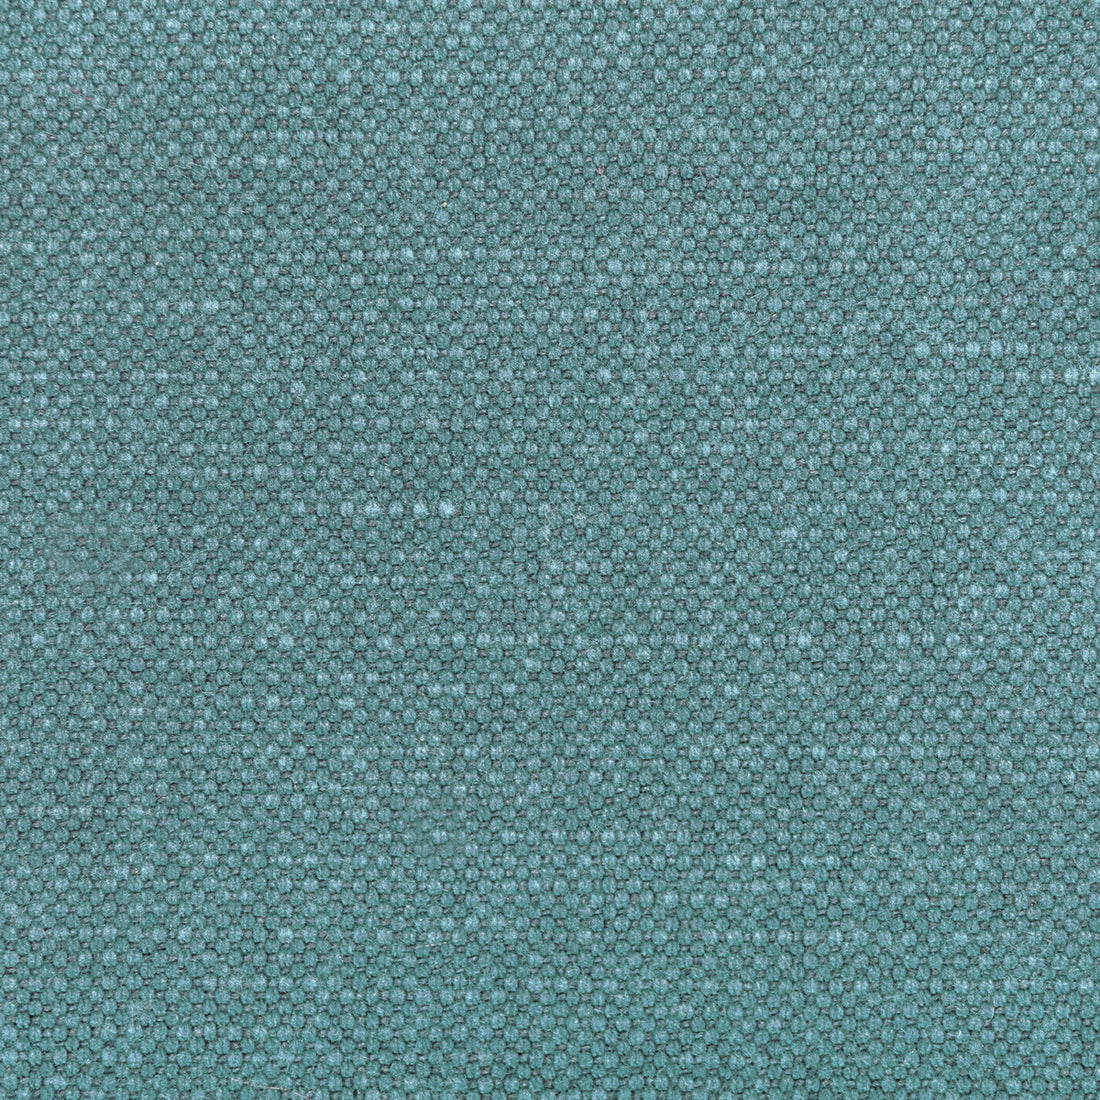 Carson fabric in lake color - pattern 36282.155.0 - by Kravet Basics